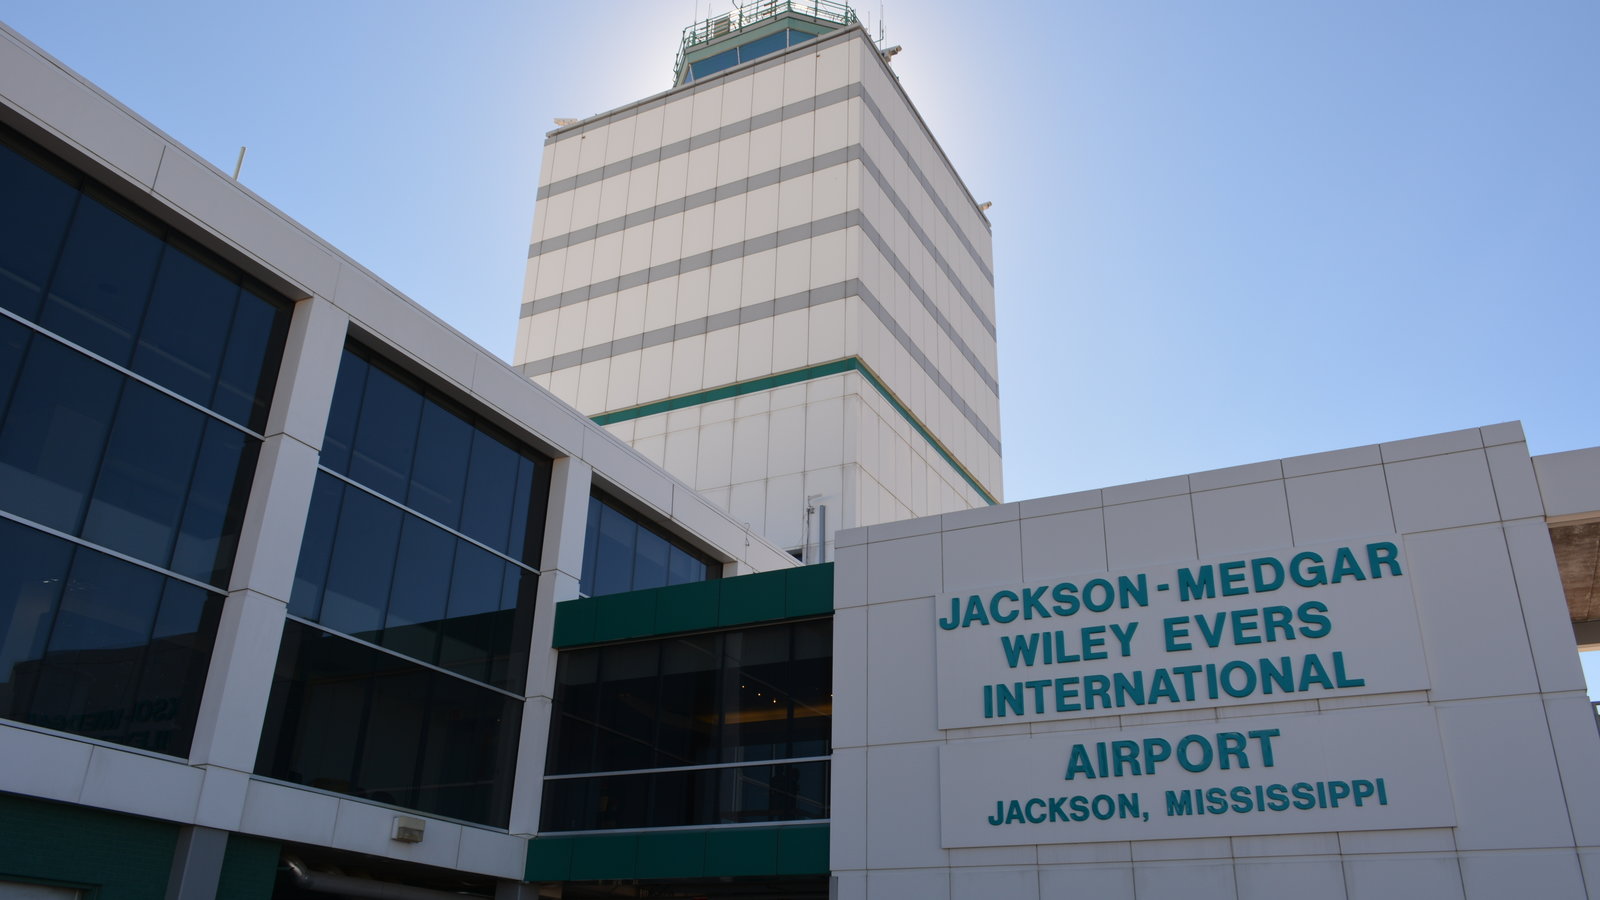 Jackson Municipal Airport Authority Announces $8 Million in Grant Funds from U.S. Bipartisan Infrastructure Law